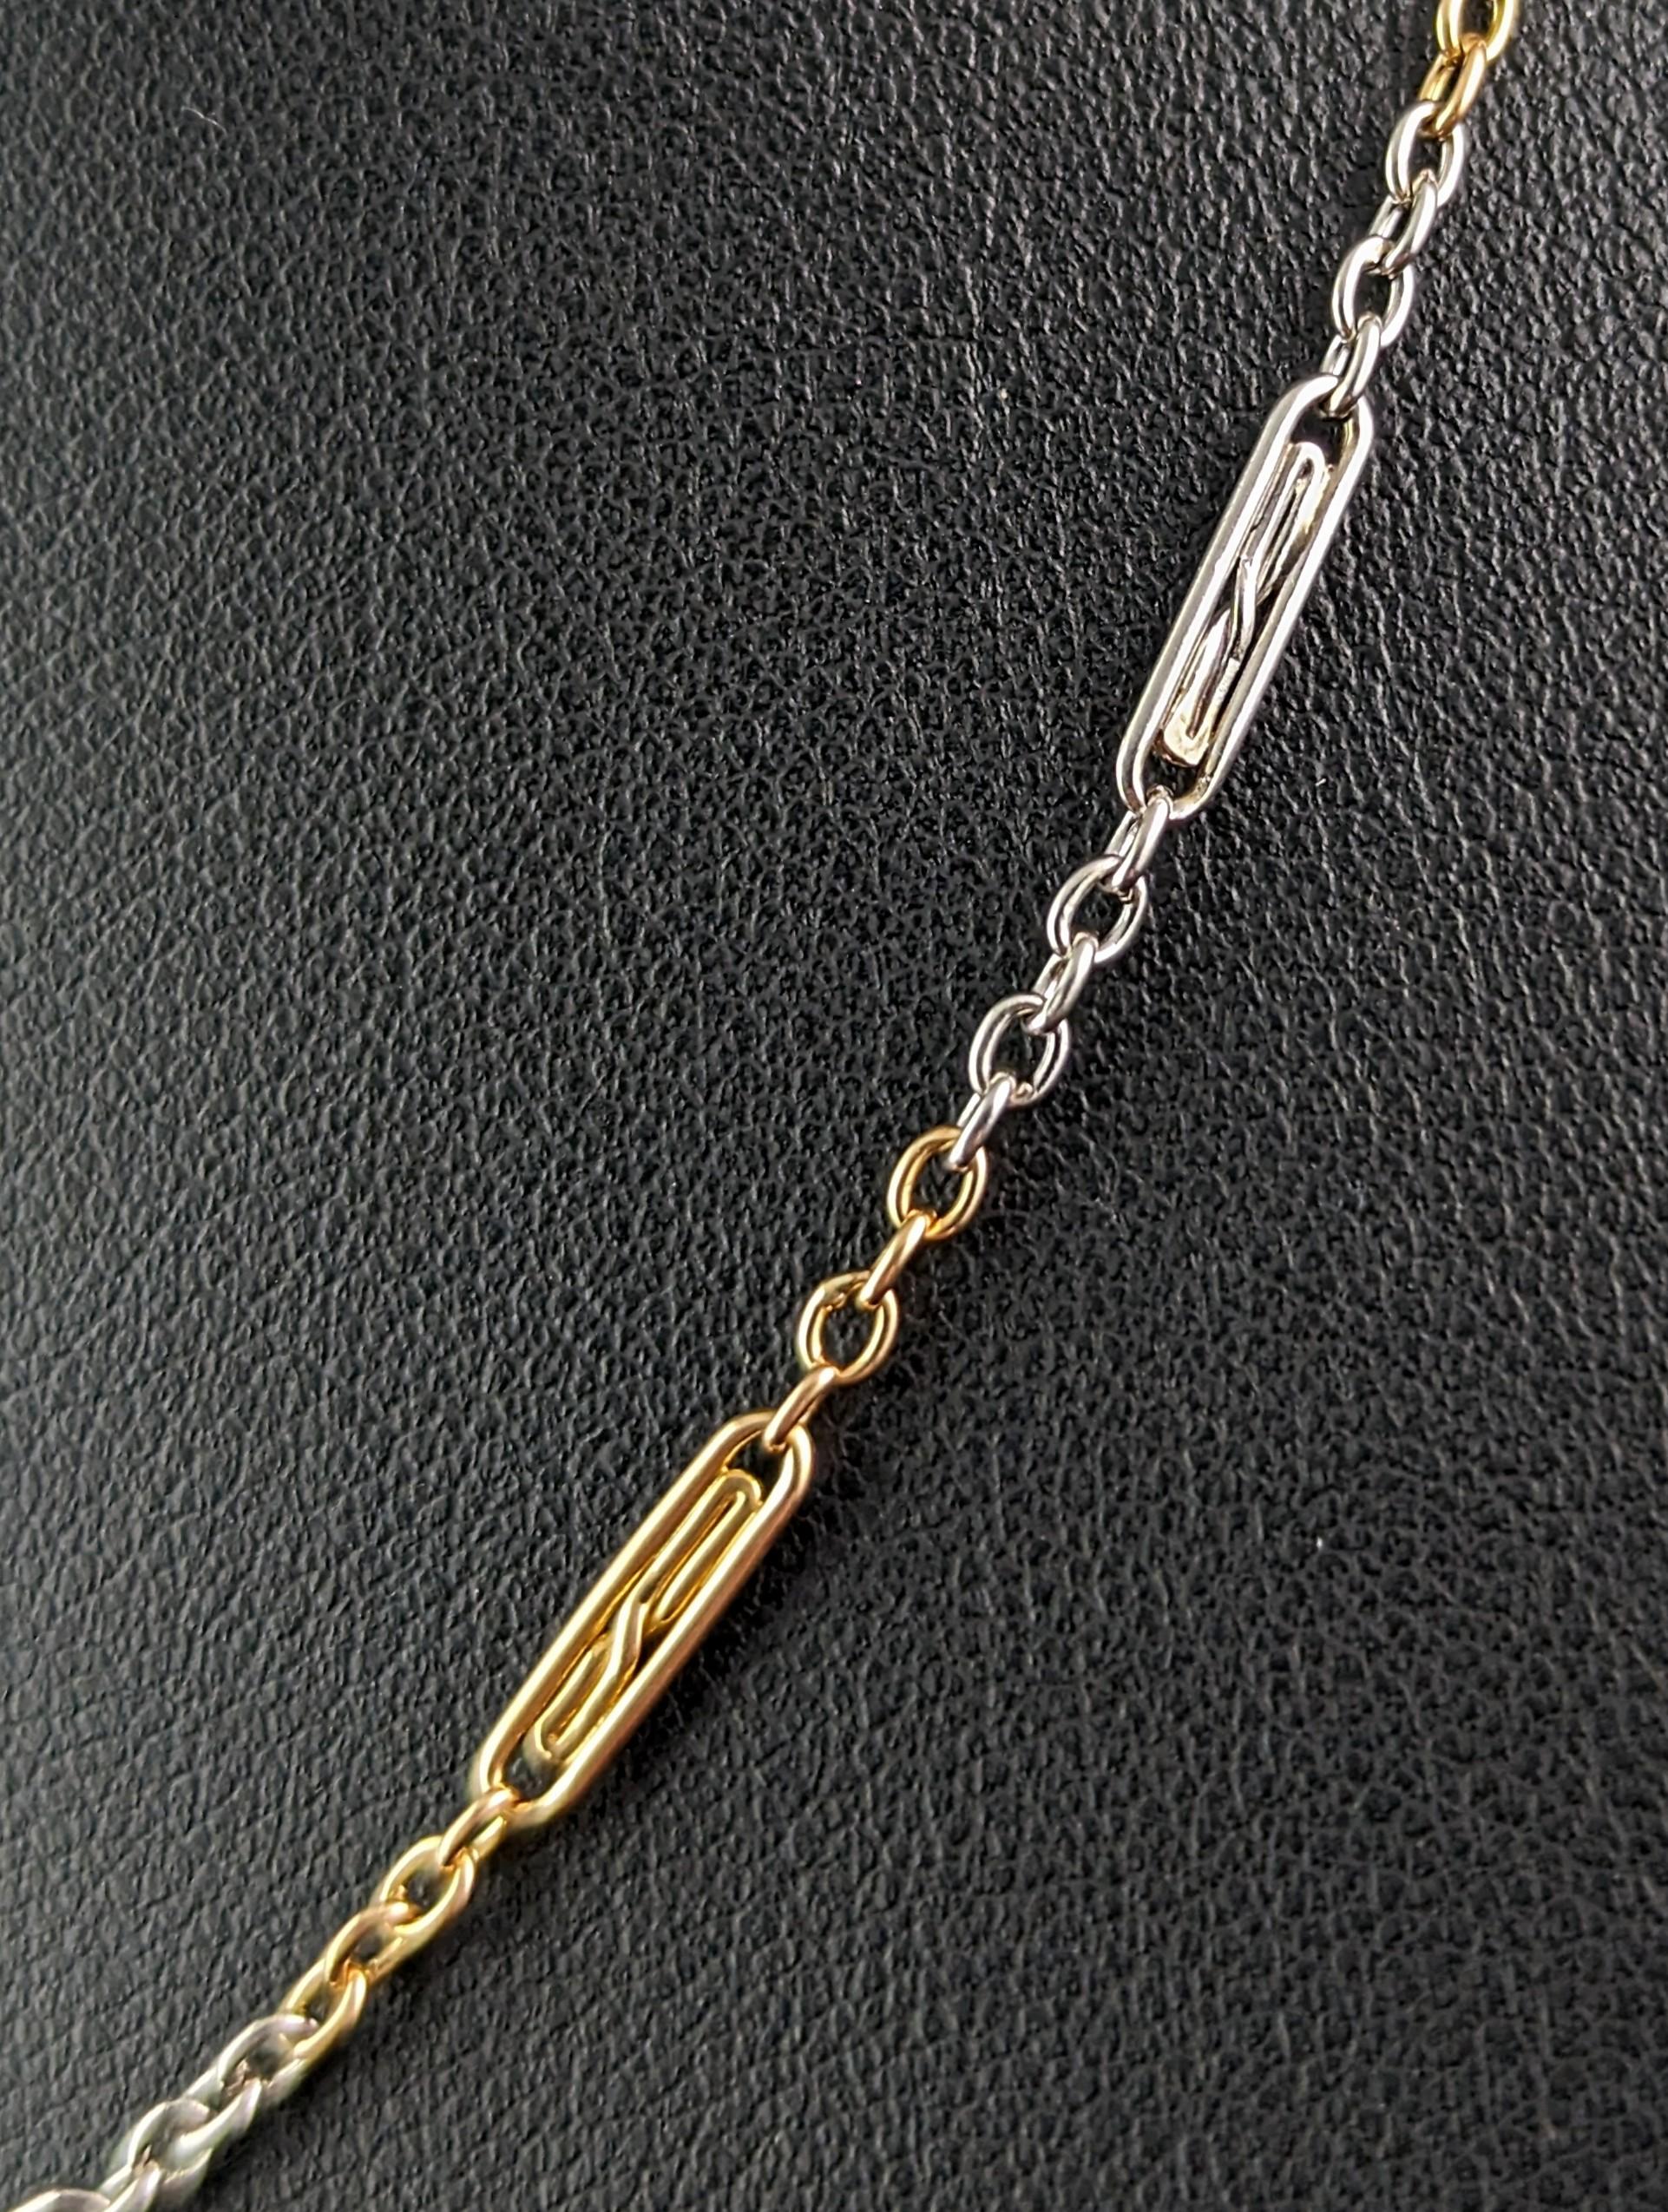 Antique 18k gold and platinum Albert chain, watch chain, Art Deco  For Sale 1